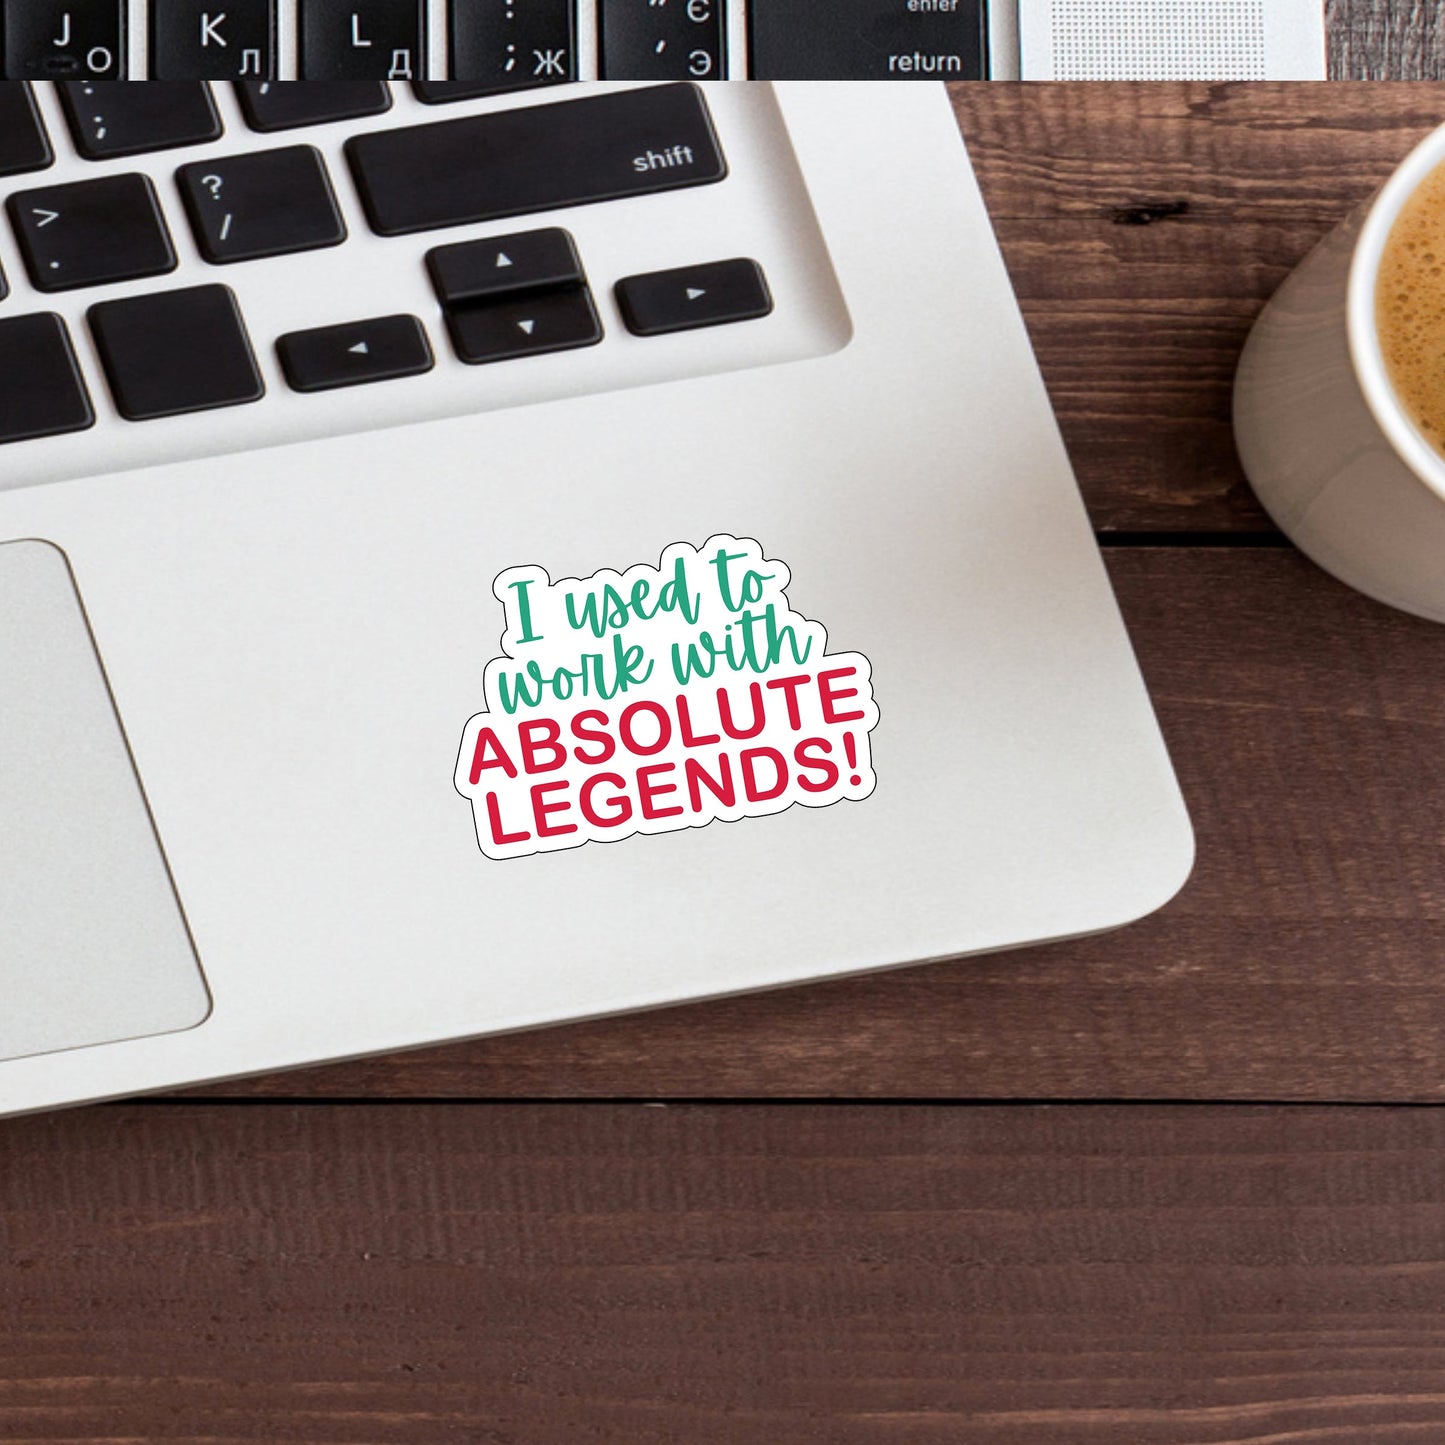 I used to work with absolute legends  Sticker,  Vinyl sticker, laptop sticker, Tablet sticker